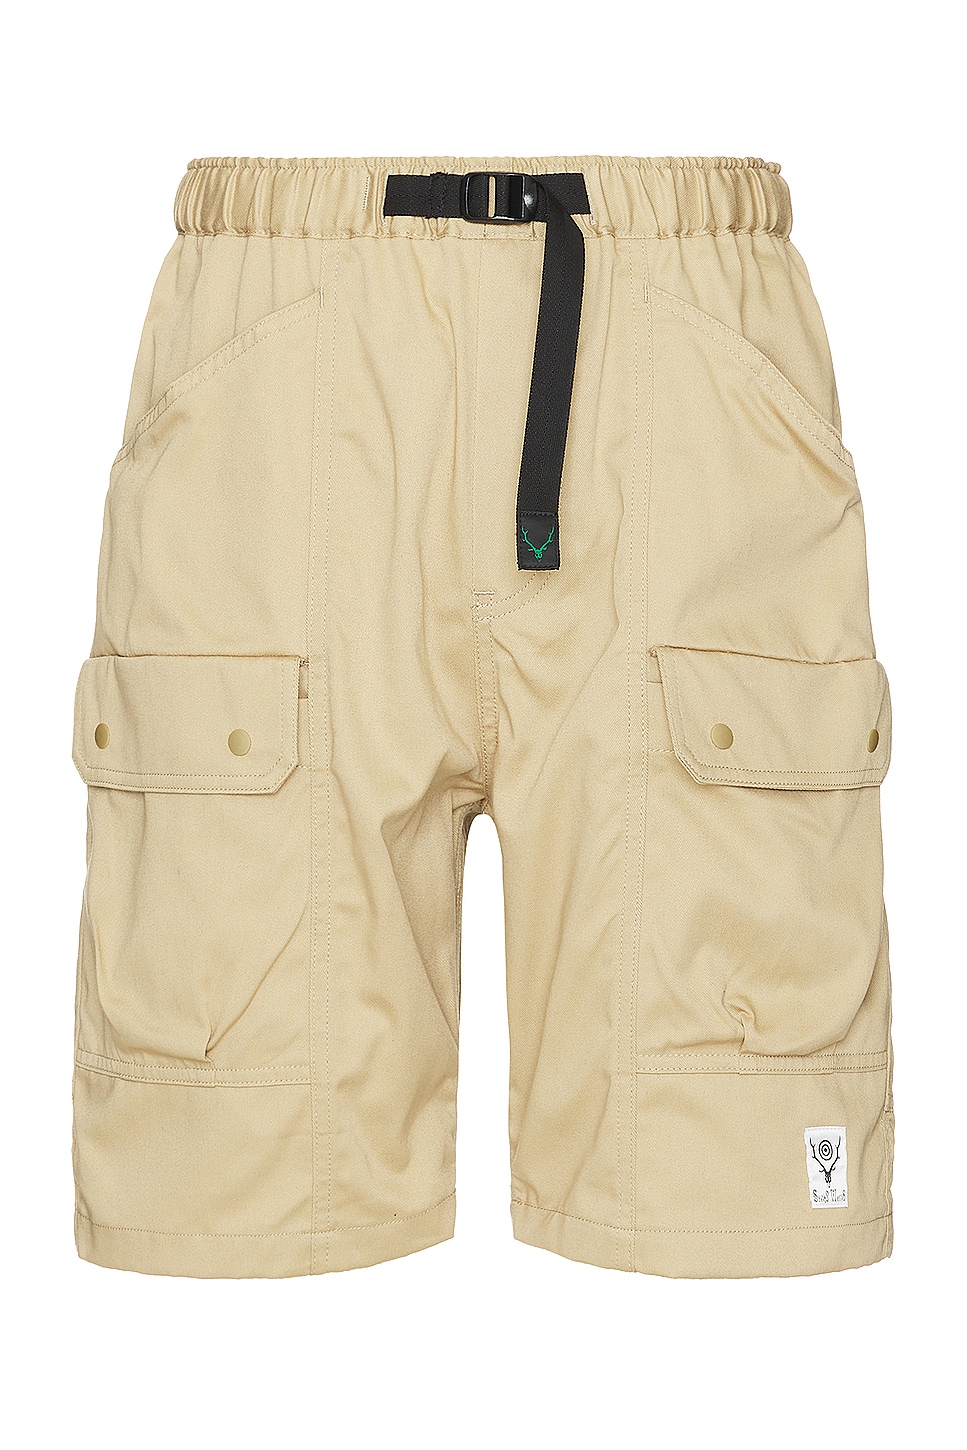 Image 1 of South2 West8 Belted Harbor Short Cmo Twill in A-Beige